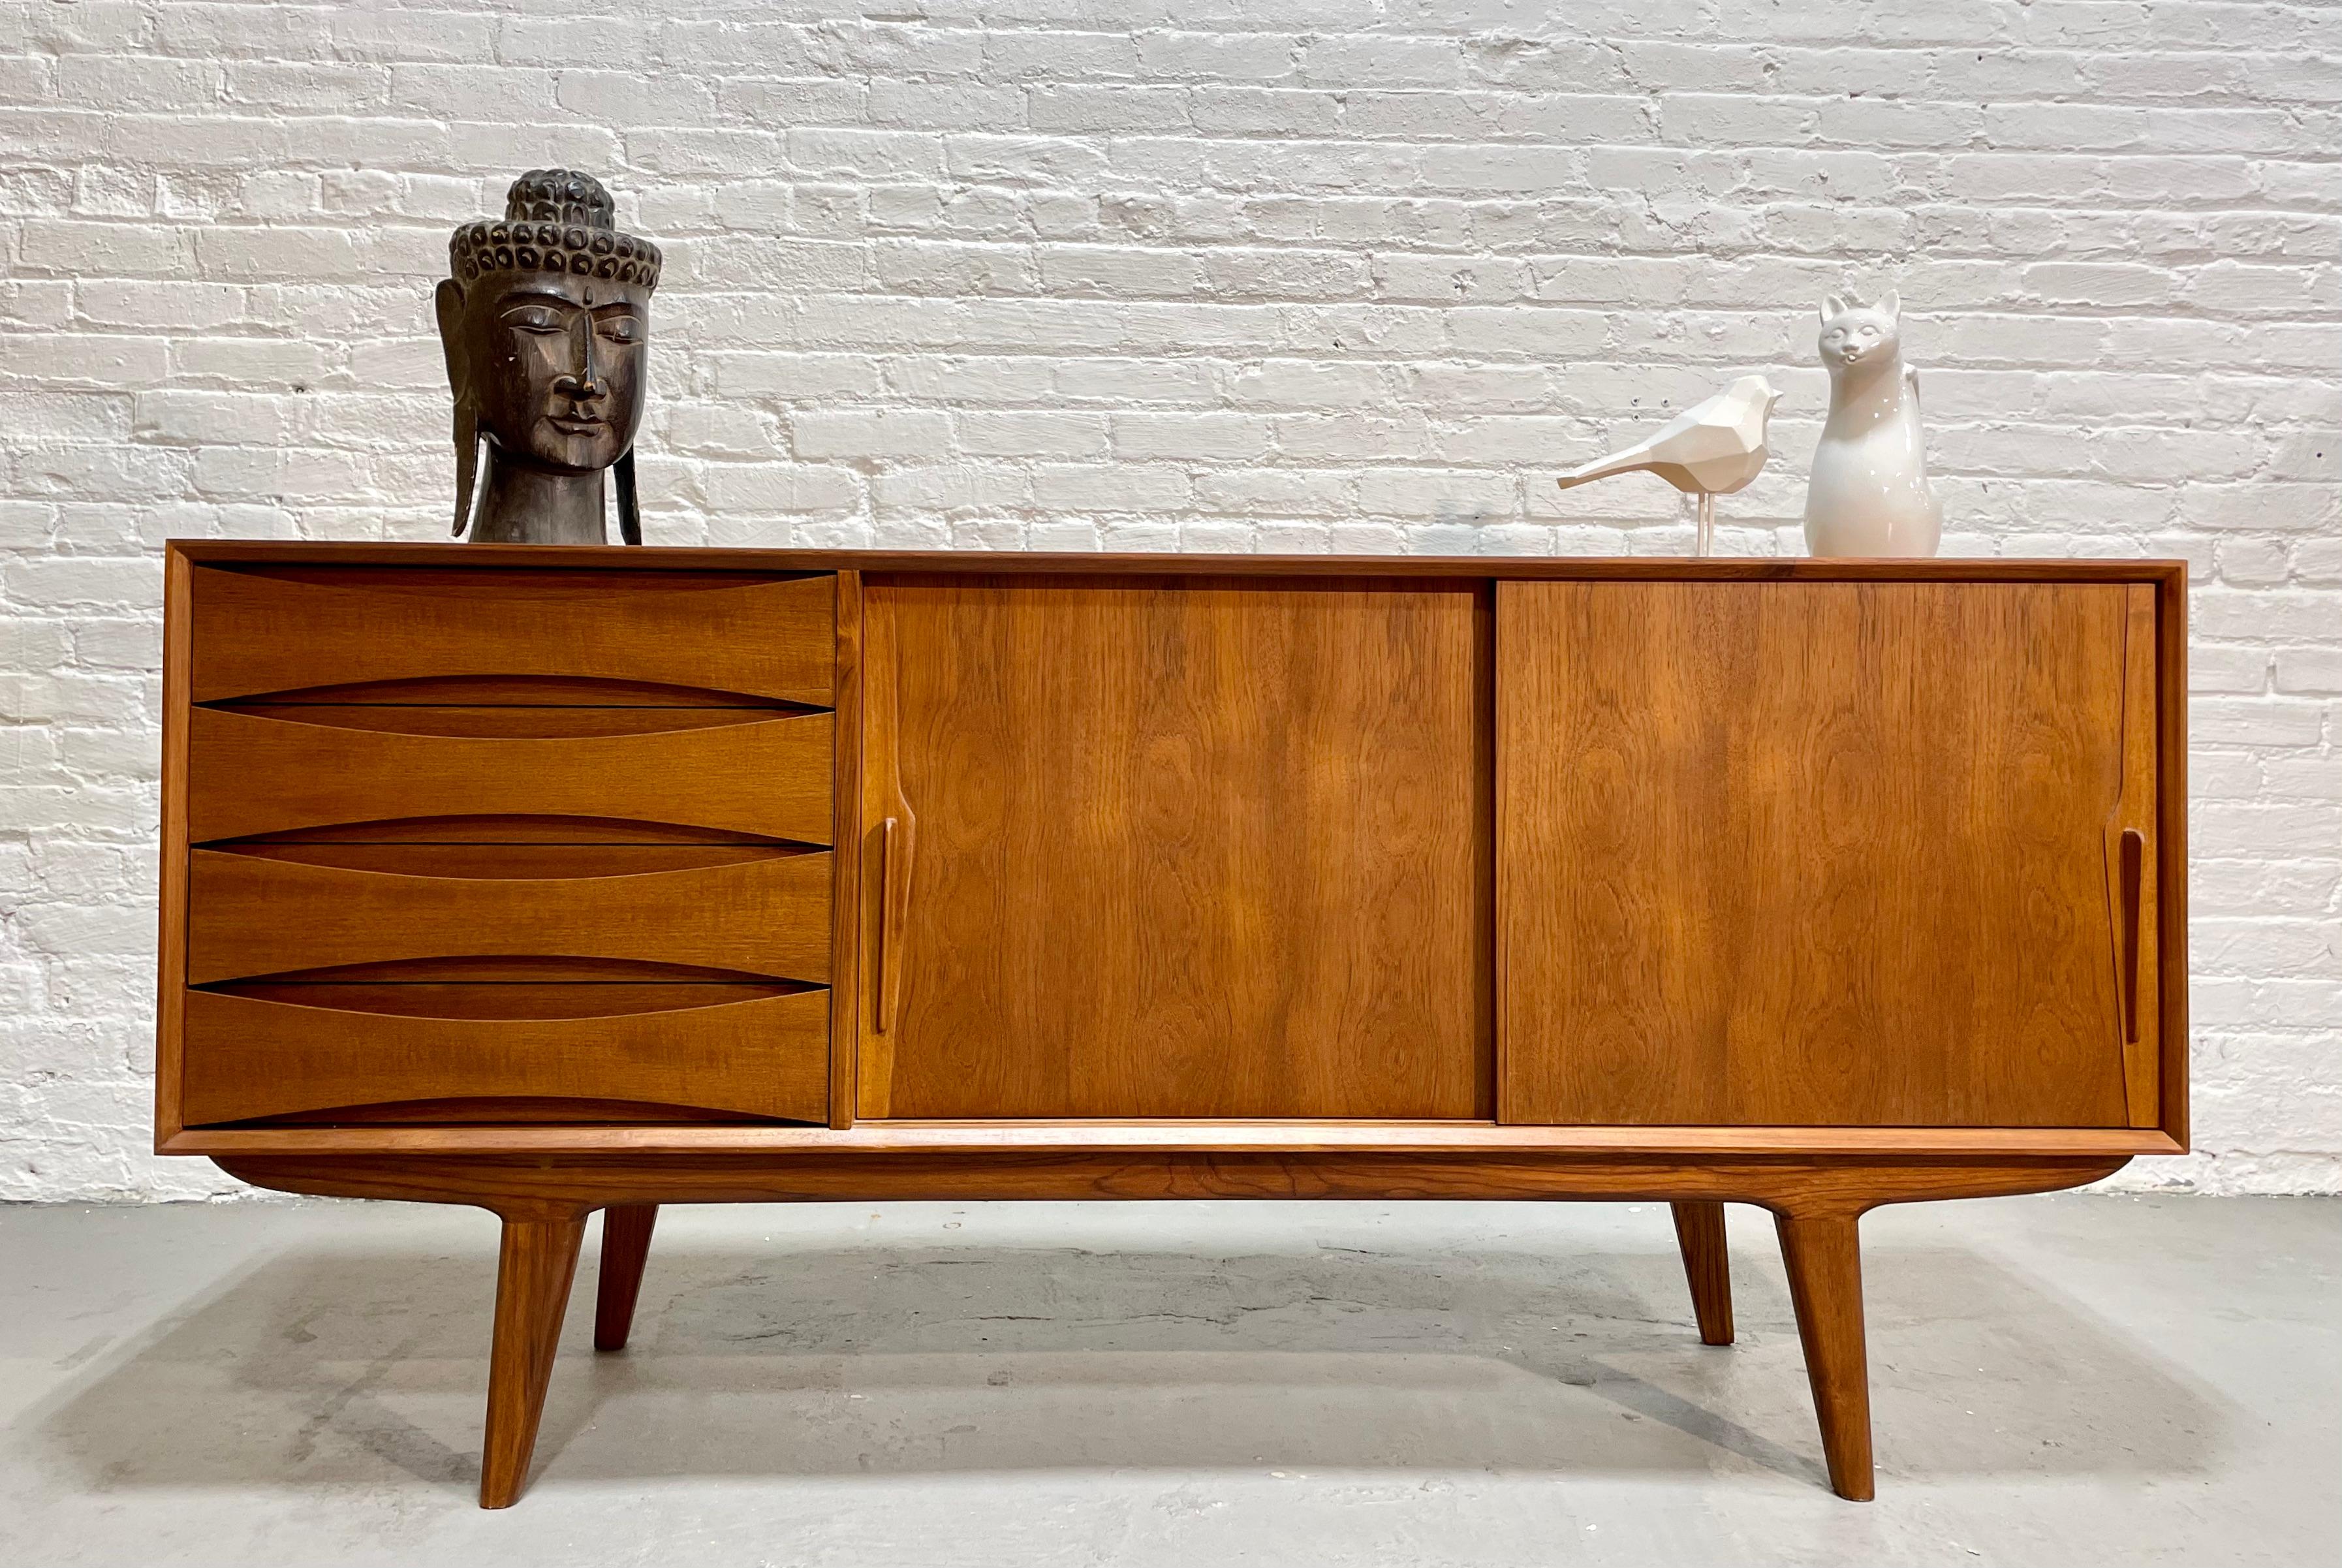 Wood  Handsome Mid Century MODERN styled SIDEBOARD / CREDENZA media stand For Sale